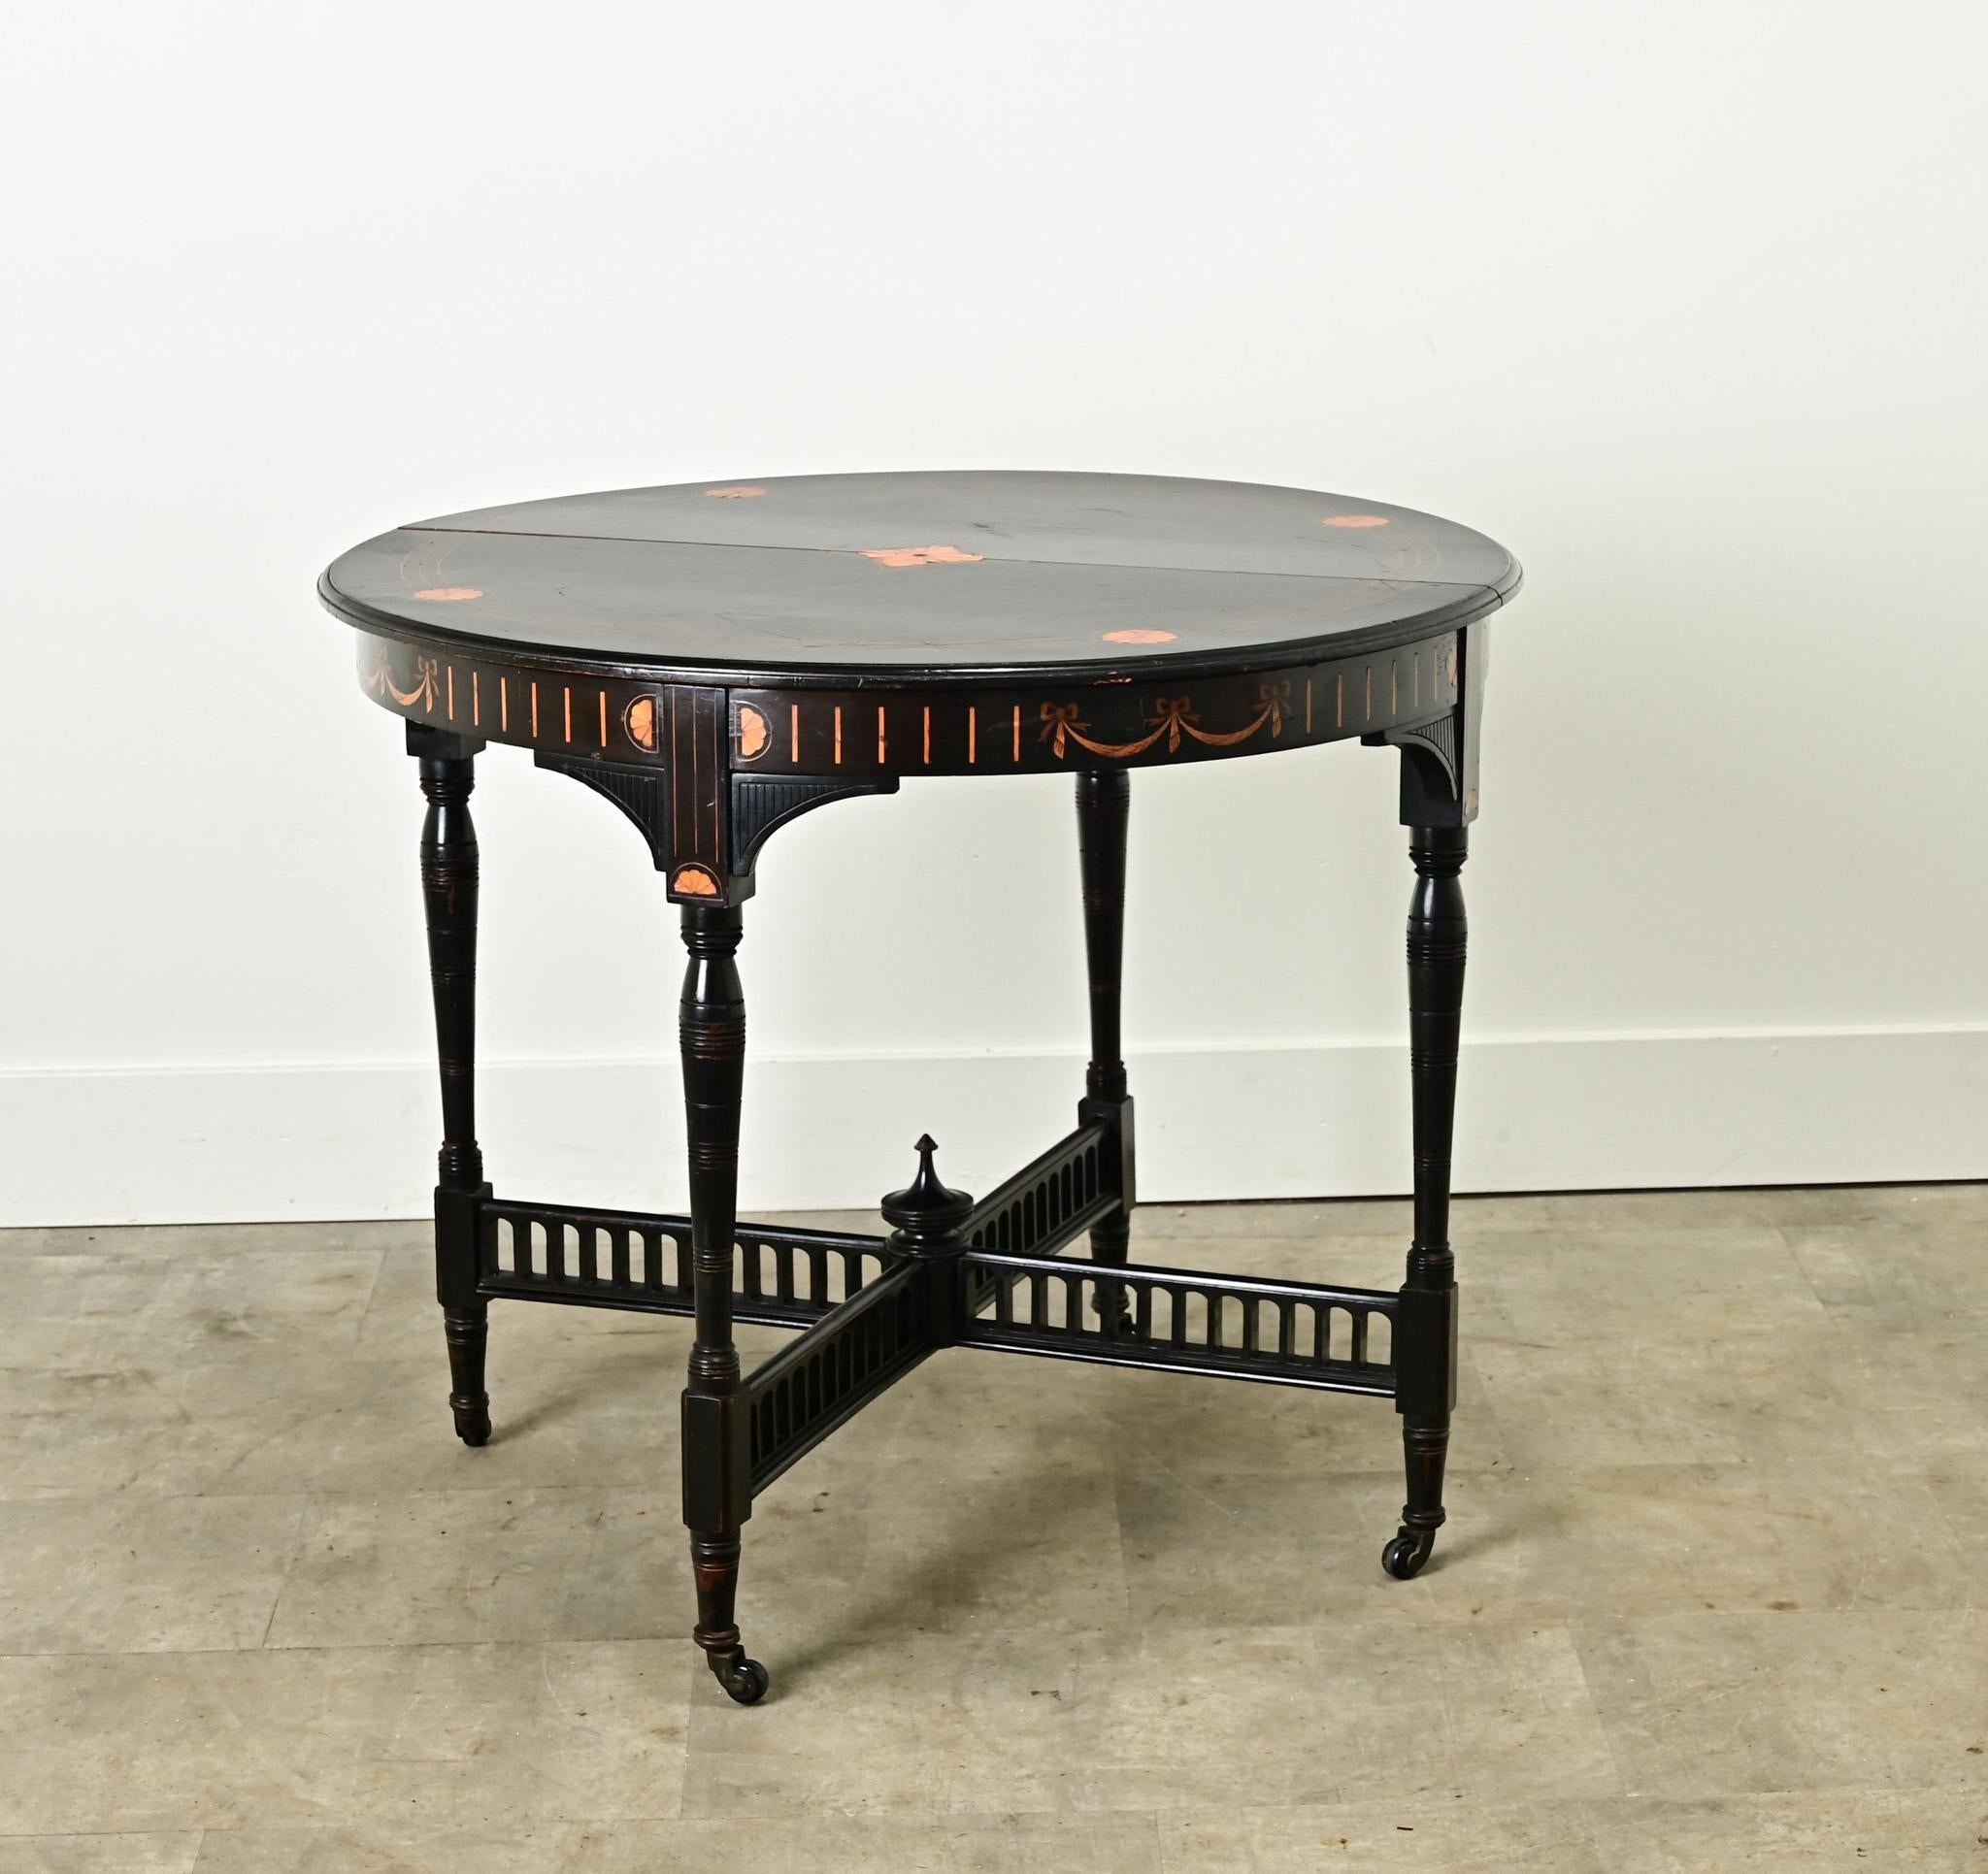 A colonial ebonized mahogany gueridon made in the Netherlands. This interesting round table has an ebonized mahogany finish with mahogany inlay designs on the top and surrounding the apron. Four turned legs are connected by a pierced X-shaped